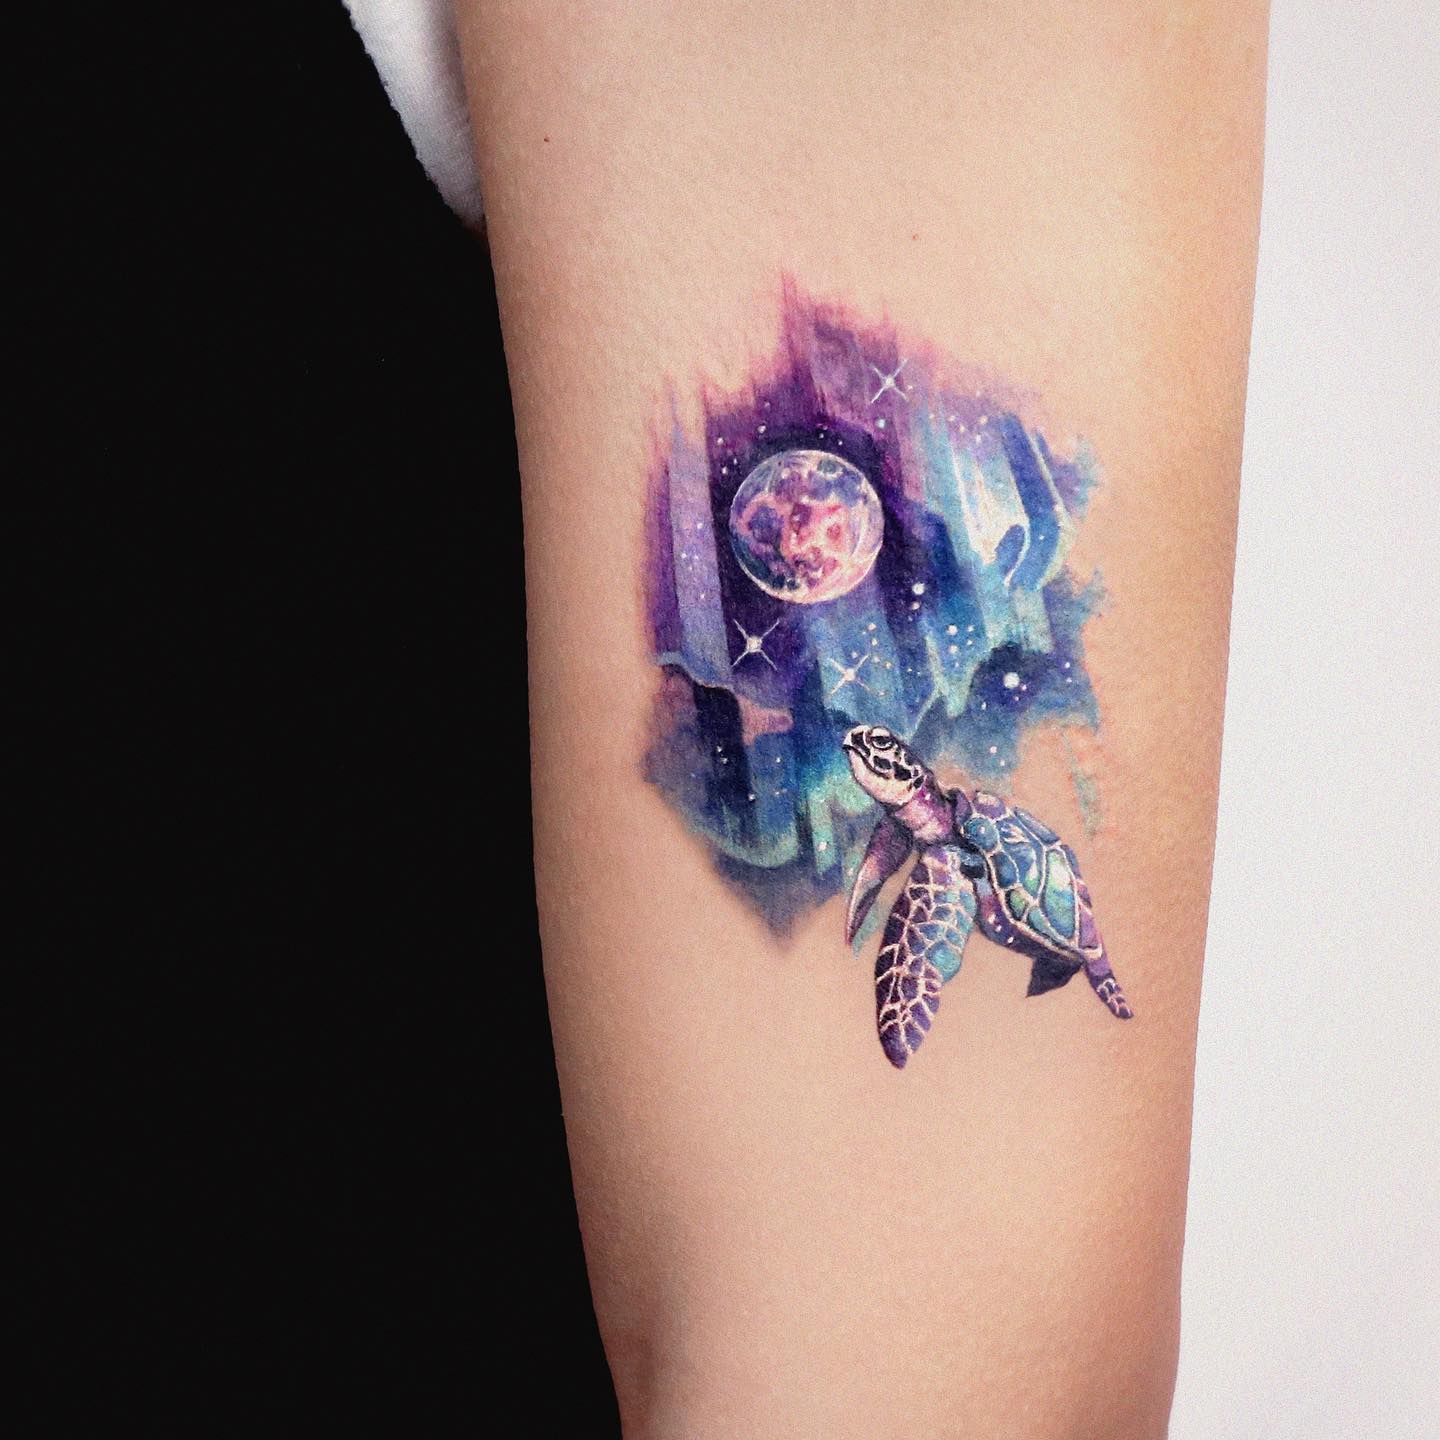 Here is another creative tattoo that looks adorable. A sea turtle and aurora are a great combo with purple and blue color palette. The sea turtle is rising above to the aurora. The whole look is amazing with these two beautiful things in life, isn't it?